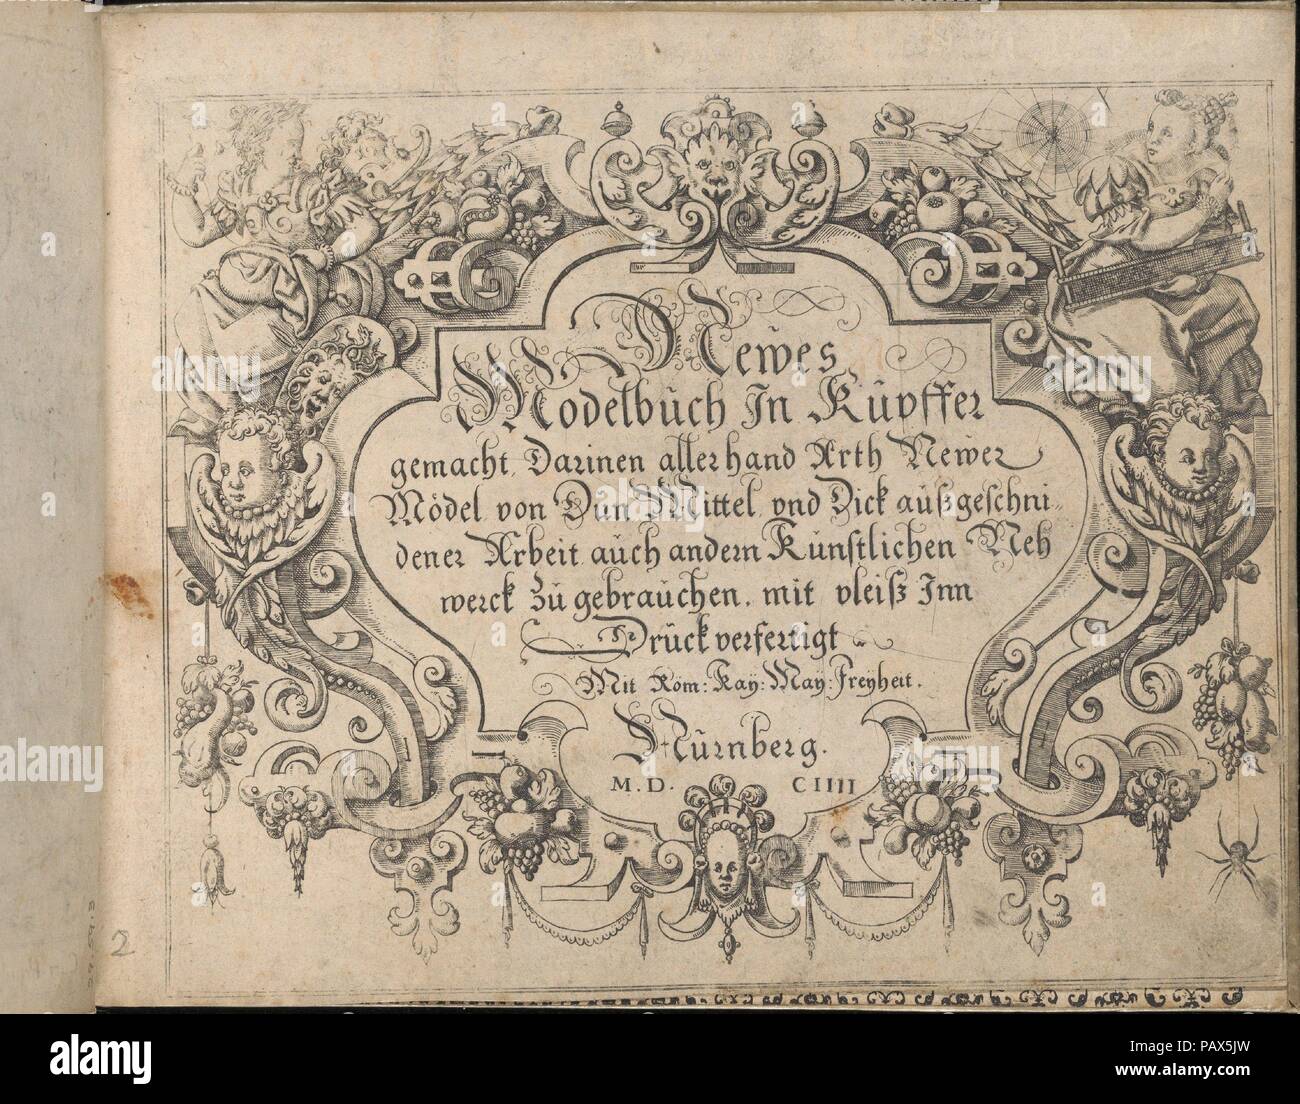 Newes Modelbuch in Kupffer (second title page, 2r). Artist: Johann Sibmacher (German, active 1590-1611). Dimensions: Overall: 5 11/16 x 7 1/16 x 3/4 in. (14.5 x 18 x 1.9 cm). Date: 1604.  Designed by Johann Sibmacher, German, active 1590-1611.  2 illustrated title pages, 12 pages of text surrounded by decorative borders, and 56 pages of designs. Museum: Metropolitan Museum of Art, New York, USA. Stock Photo